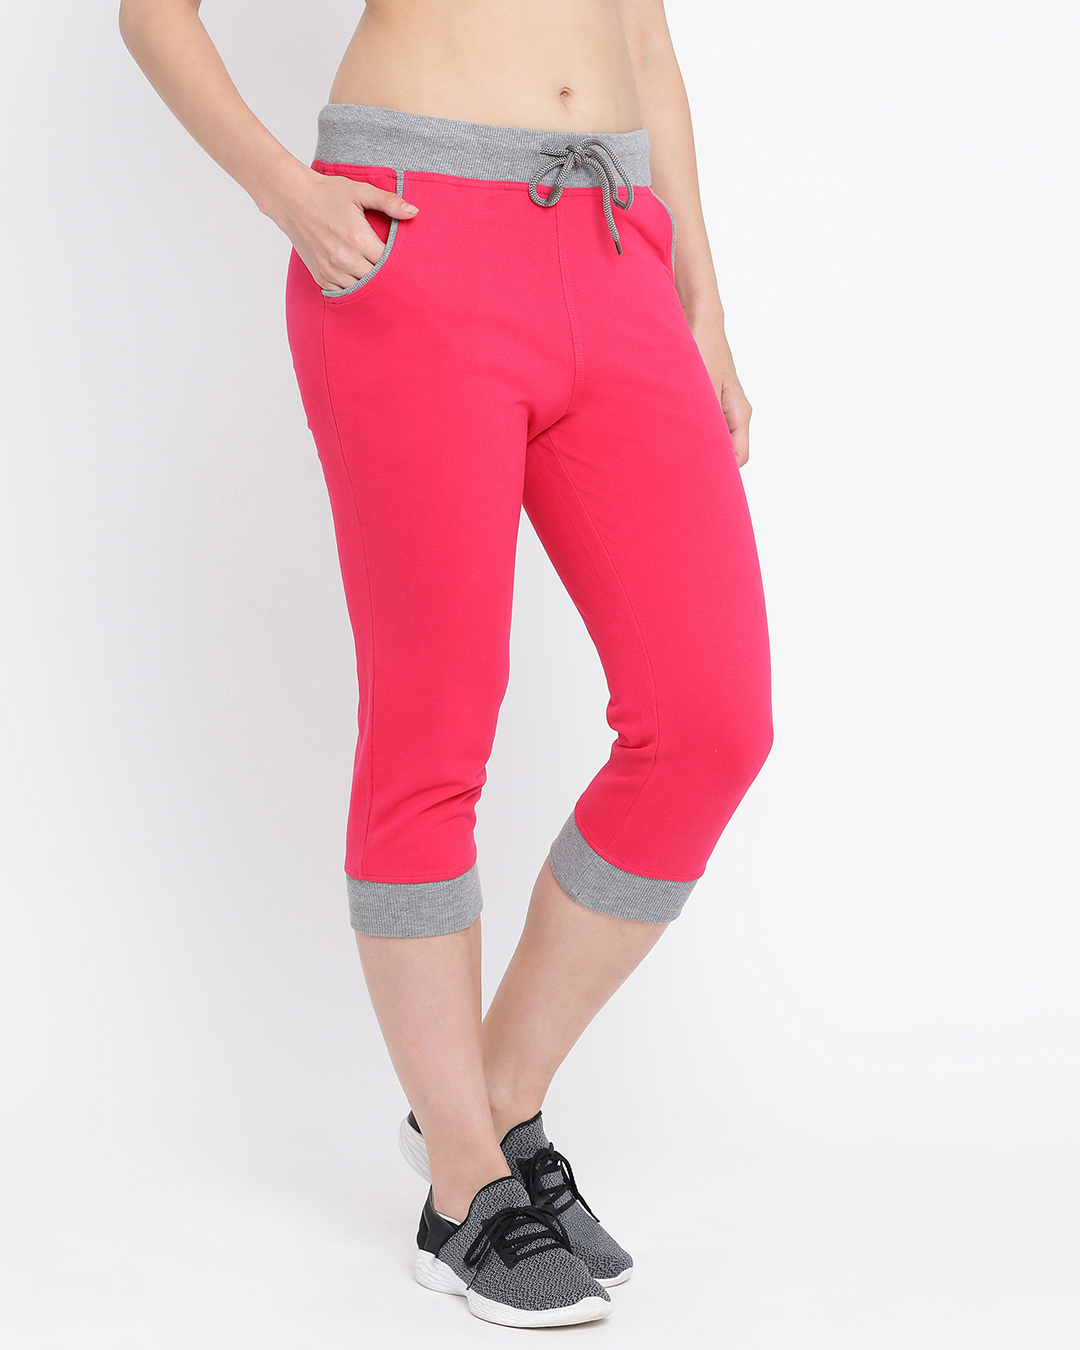 Shop Women's Pink Spandex Tights-Back